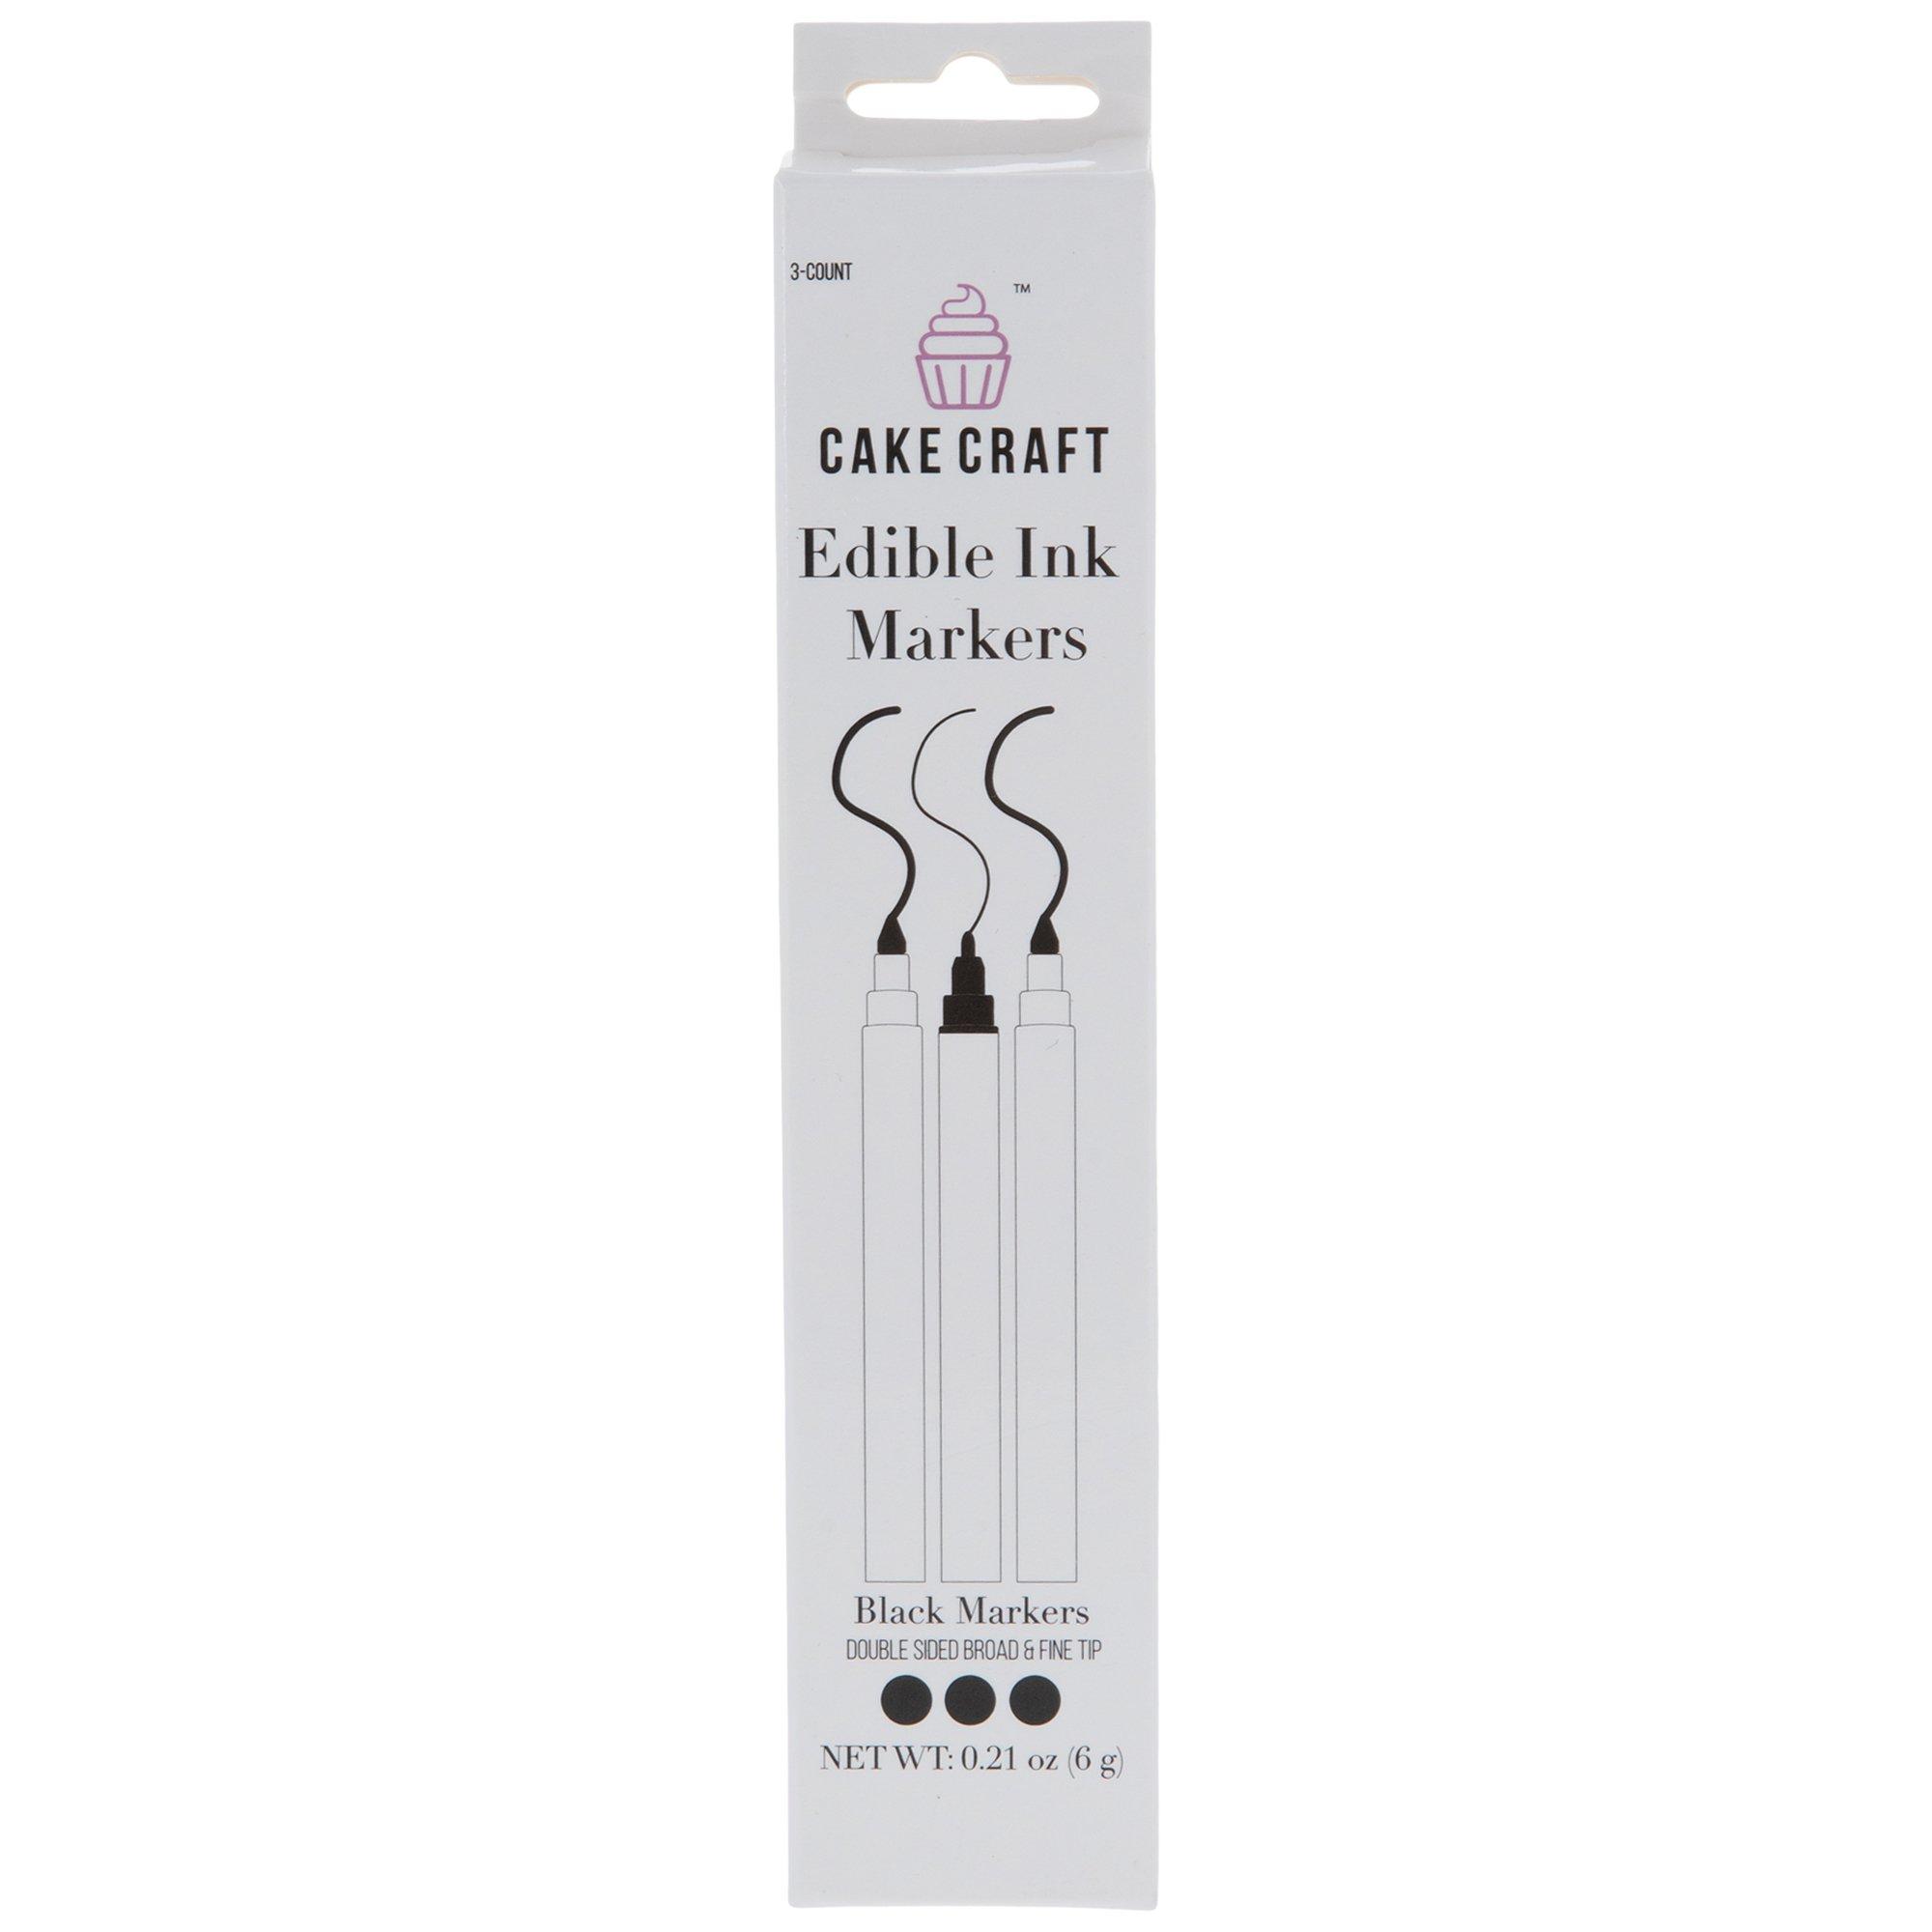 Cake Craft Primary Colors Edible Ink Markers - 5 ct